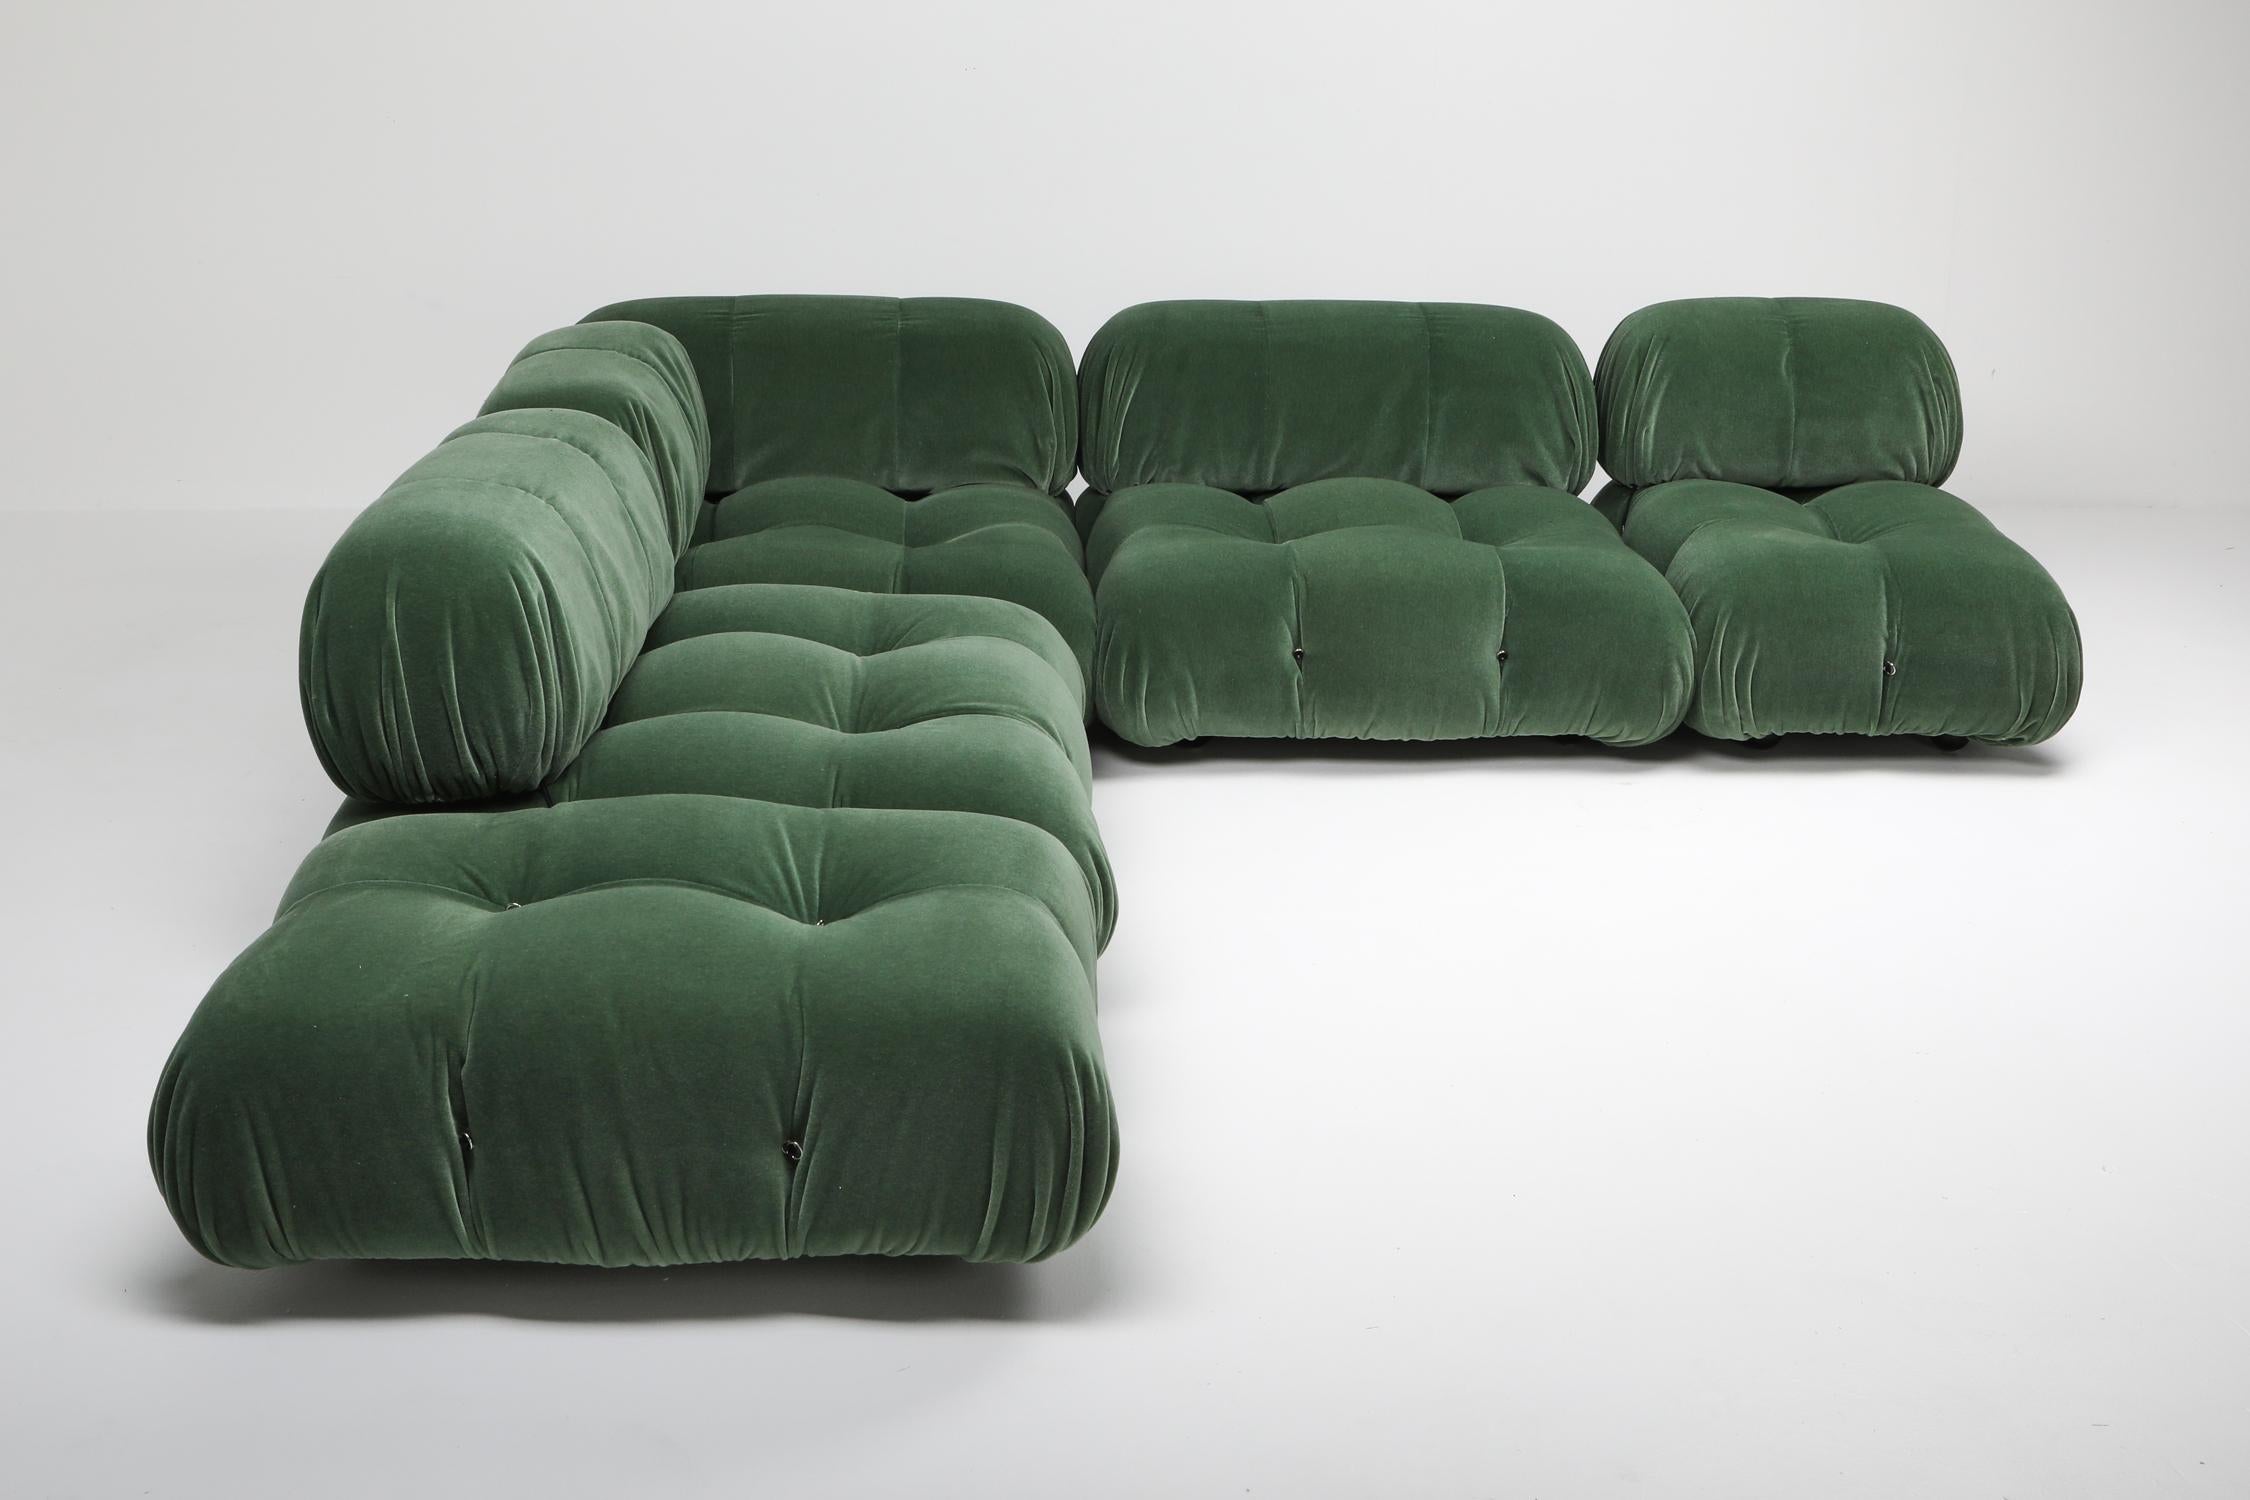 Camaleonda sectional sofa, Mario Bellini, green mohair by Pierre Frey.
We could also upholster or reupholster more modular elements to create a bespoke sectional sofa. 

This modular sofa was designed by Mario Bellini in 1971 and was manufactured